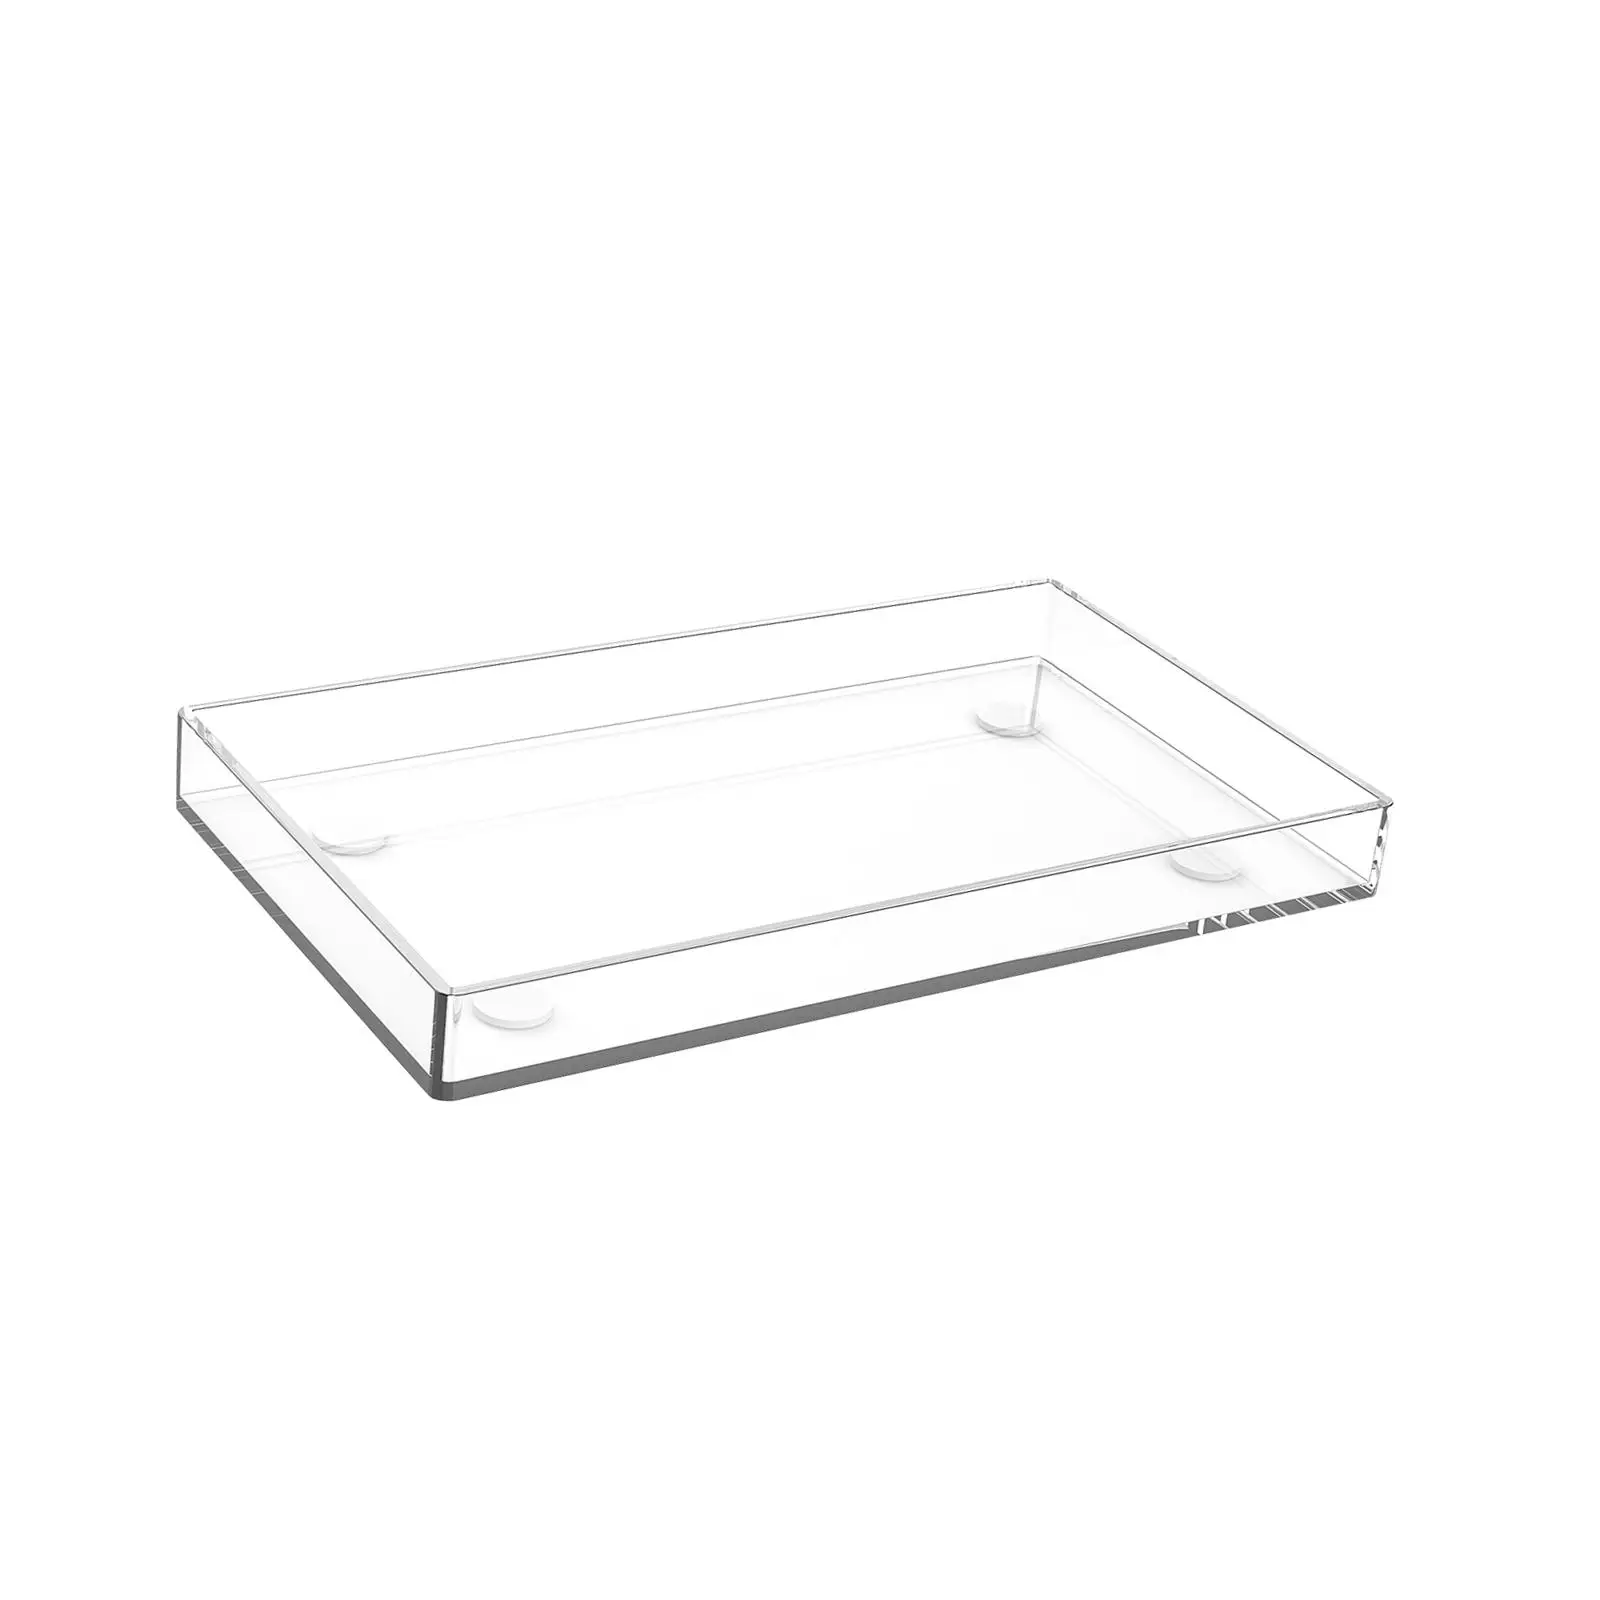 Clear Acrylic Tray Rectangular for Kitchen Tabletop Household Bedside Office